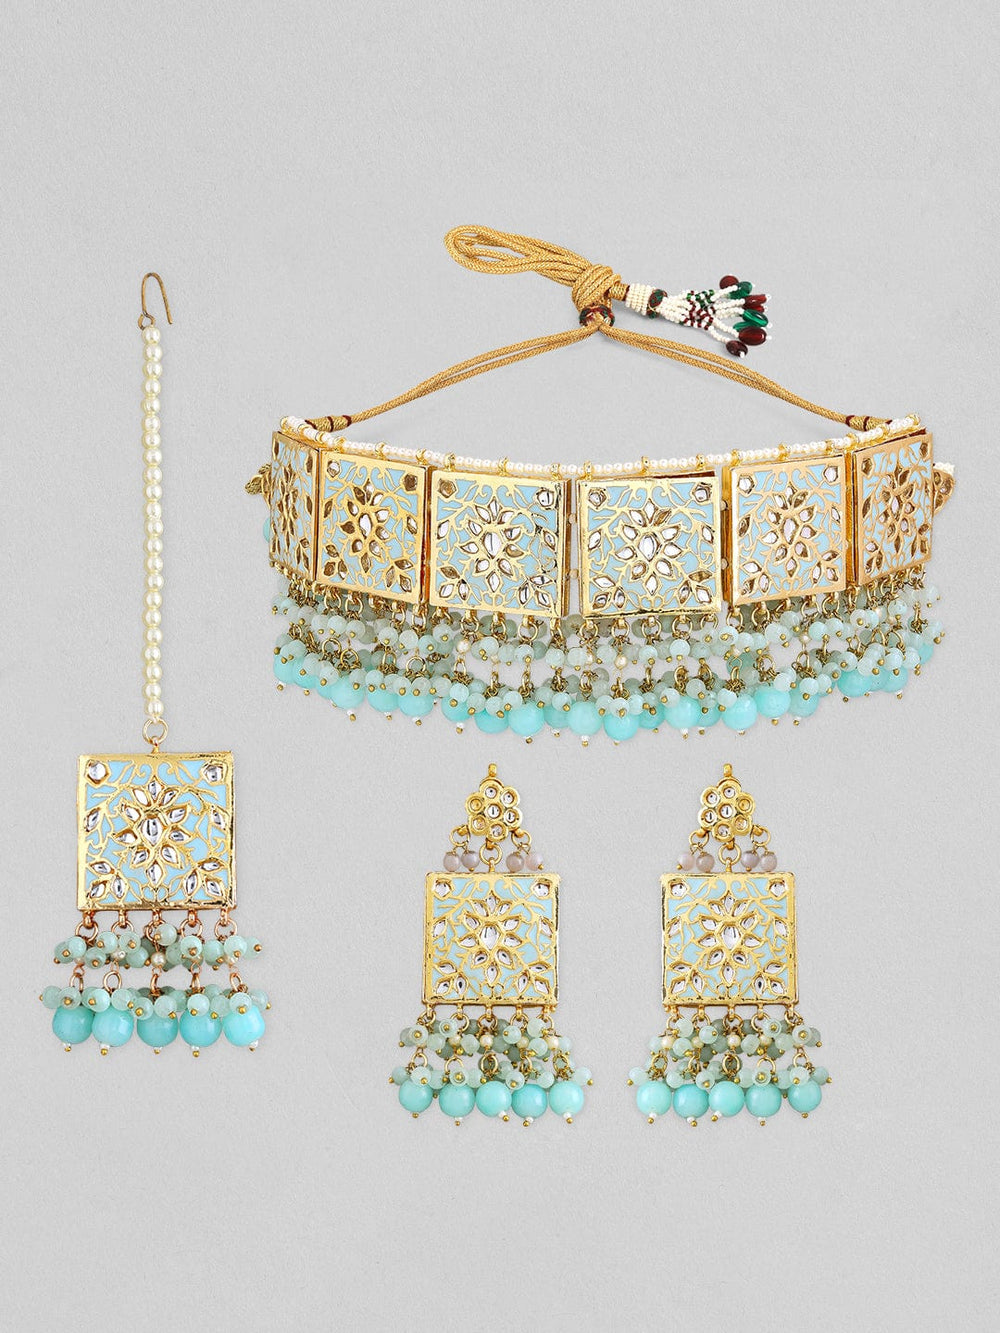 Rubans 24k Gold Plated Choker Set With Sky Blue Colour Enamel And Beads. Necklace Set